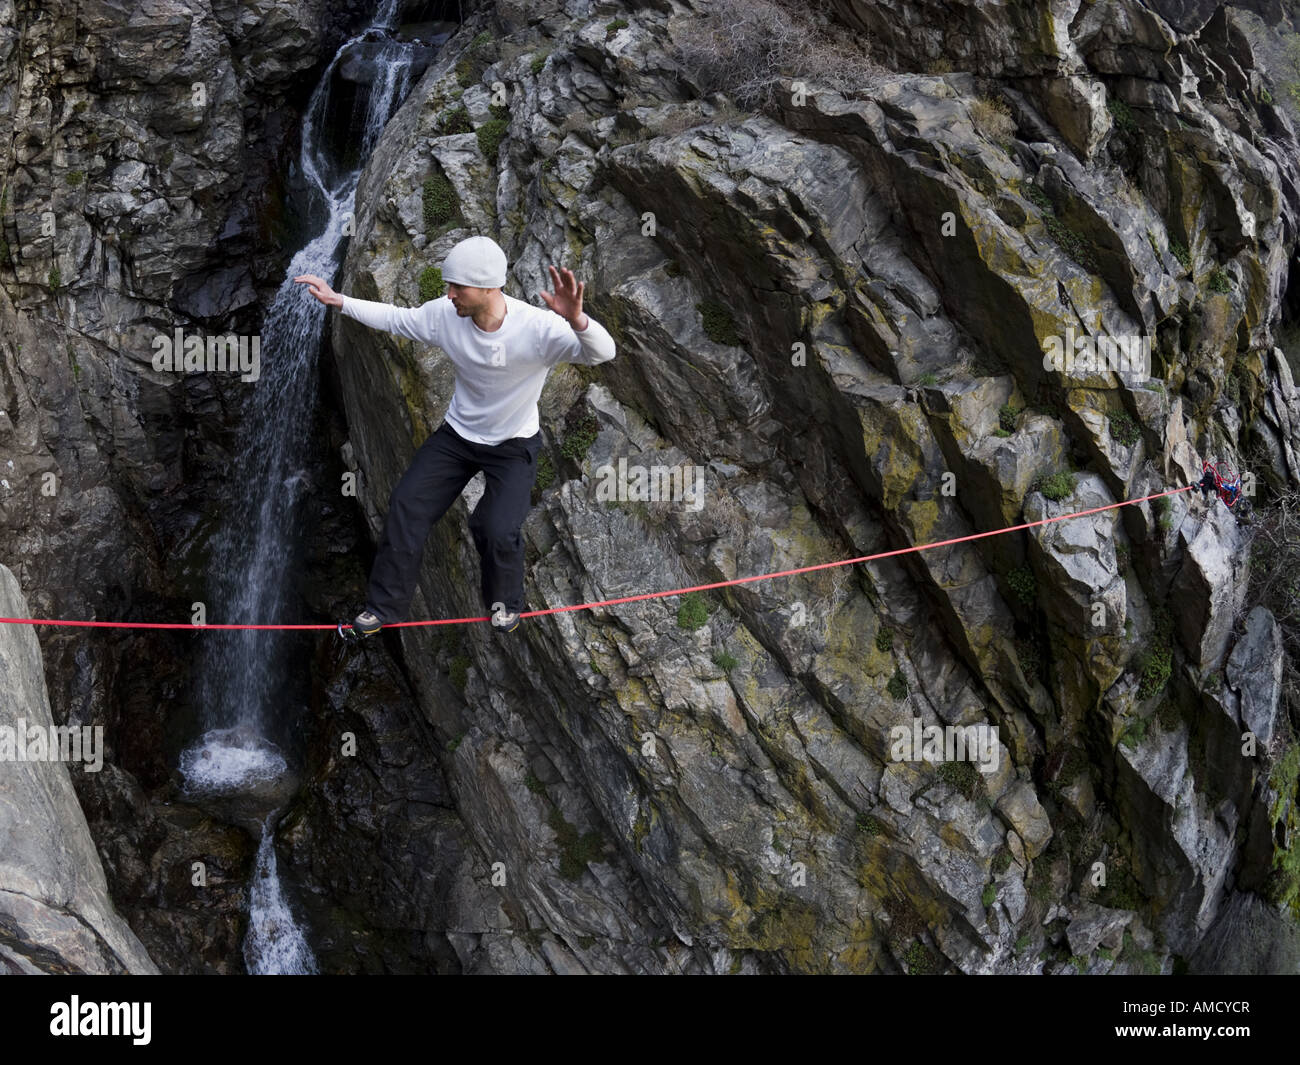 Man walking across rope with rock and waterfall in background Stock Photo